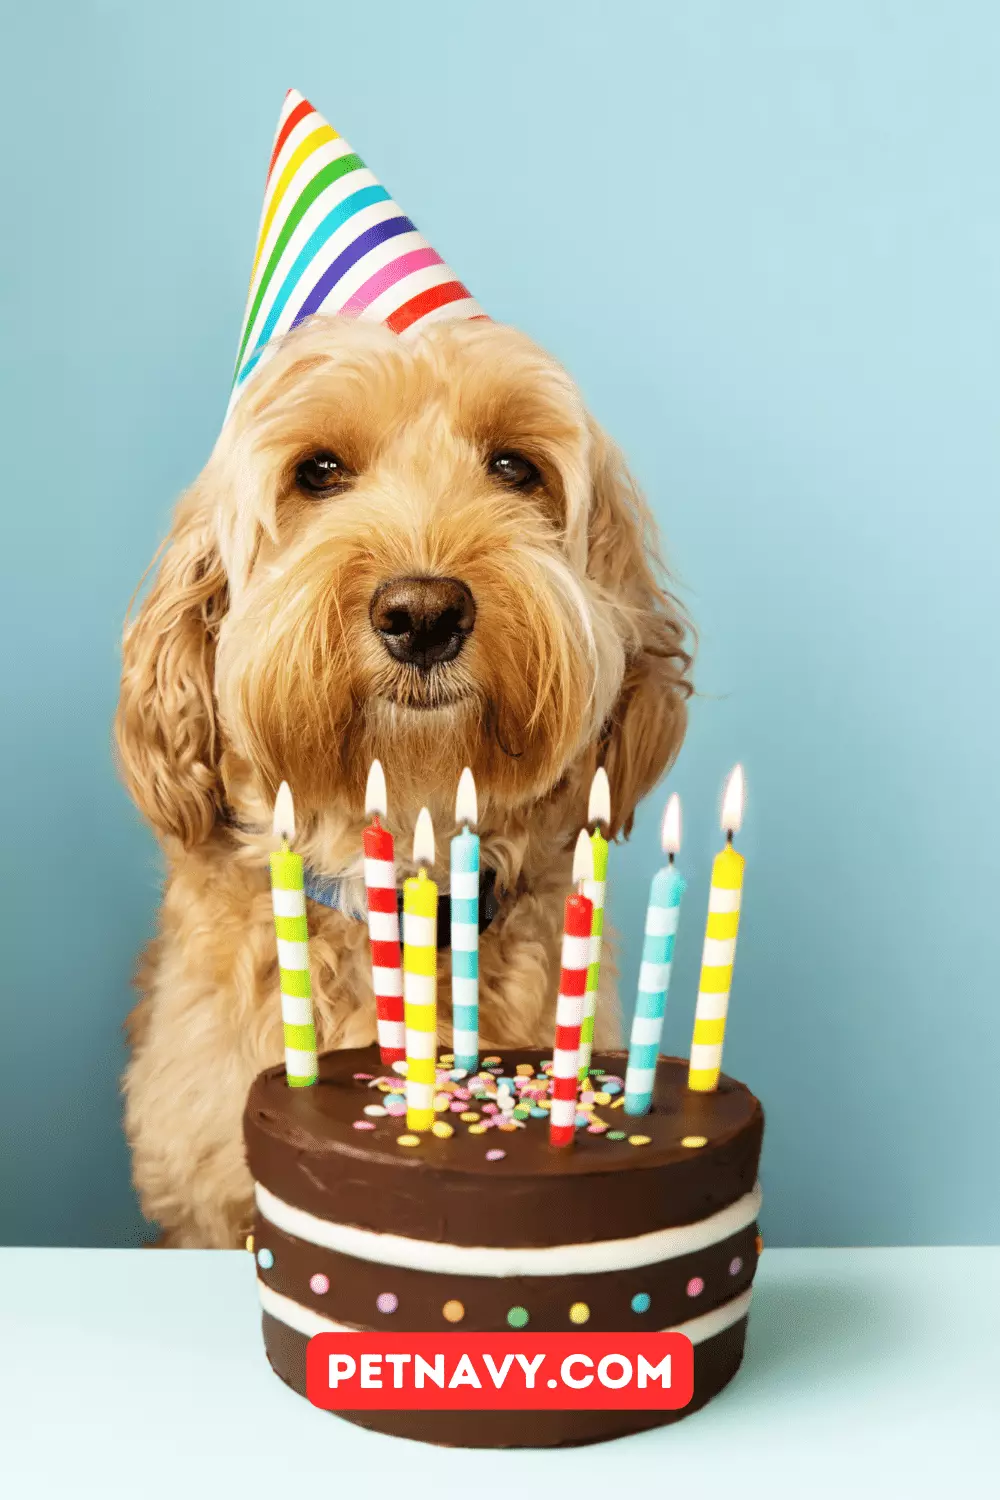 Dog Birthday Party 10 Tips for a Memorable Day